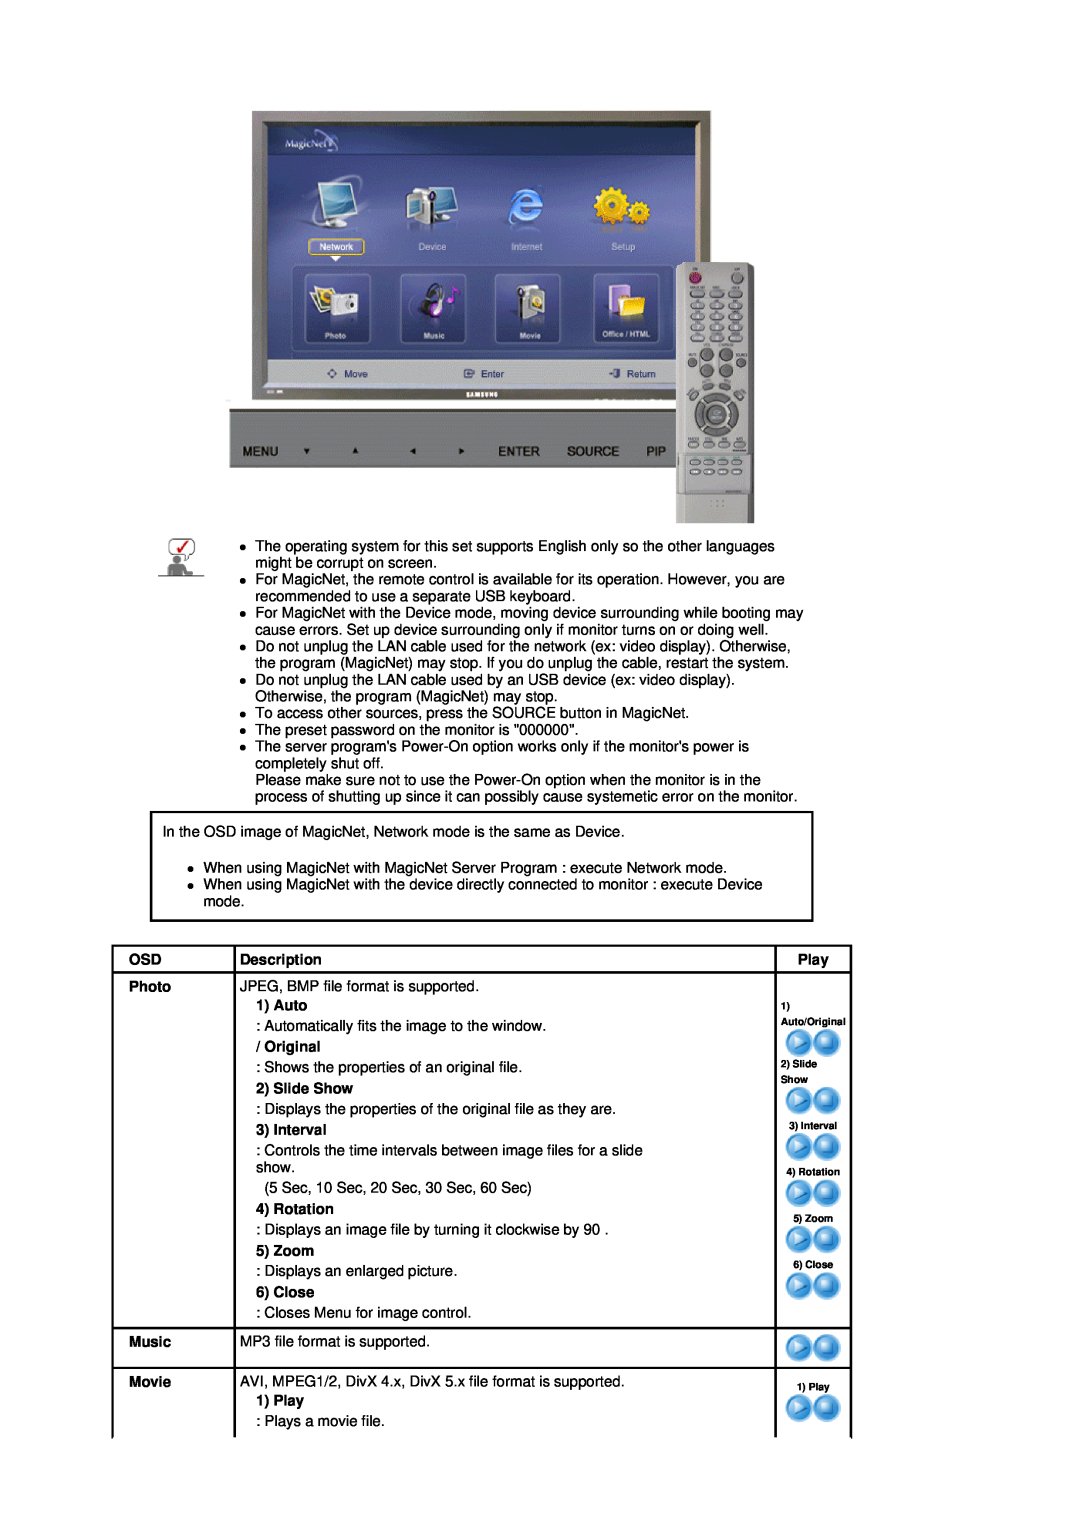 Samsung 400Pn, 400P manual z To access other sources, press the SOURCE button in MagicNet 